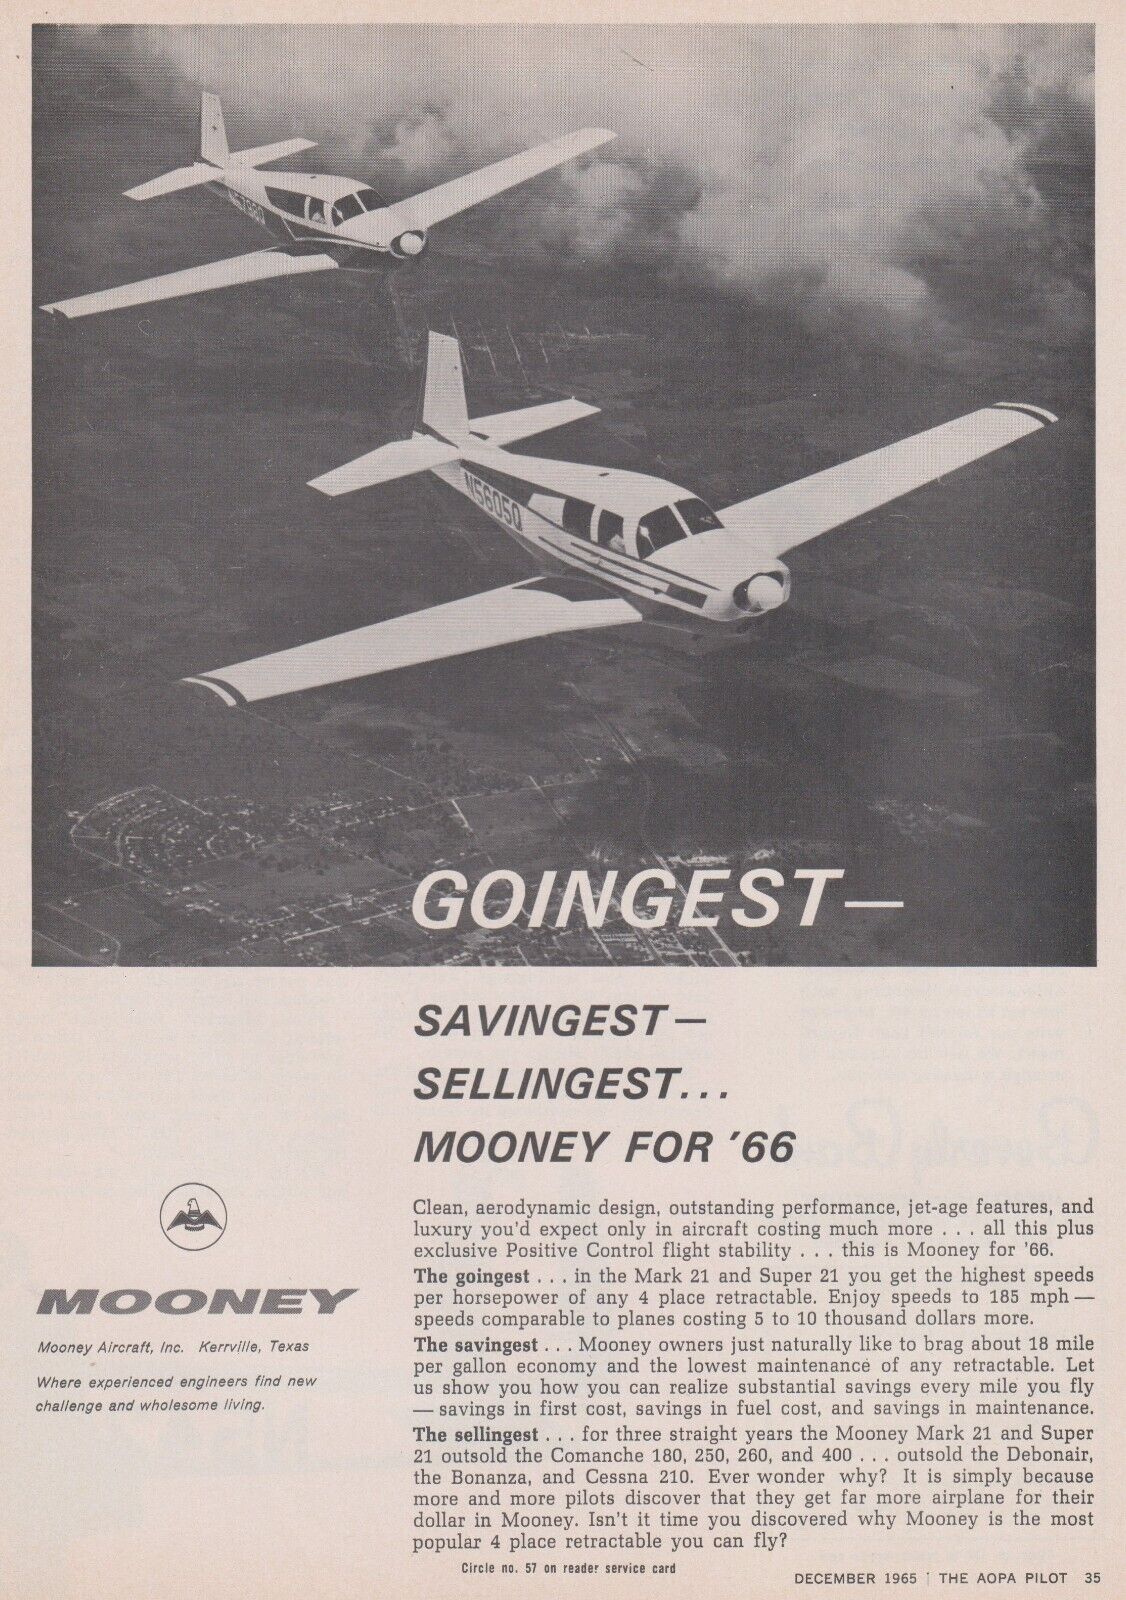 Aviation Magazine Print - Mooney Aircraft Mark 21 and Super 21 for 1966 (1965)